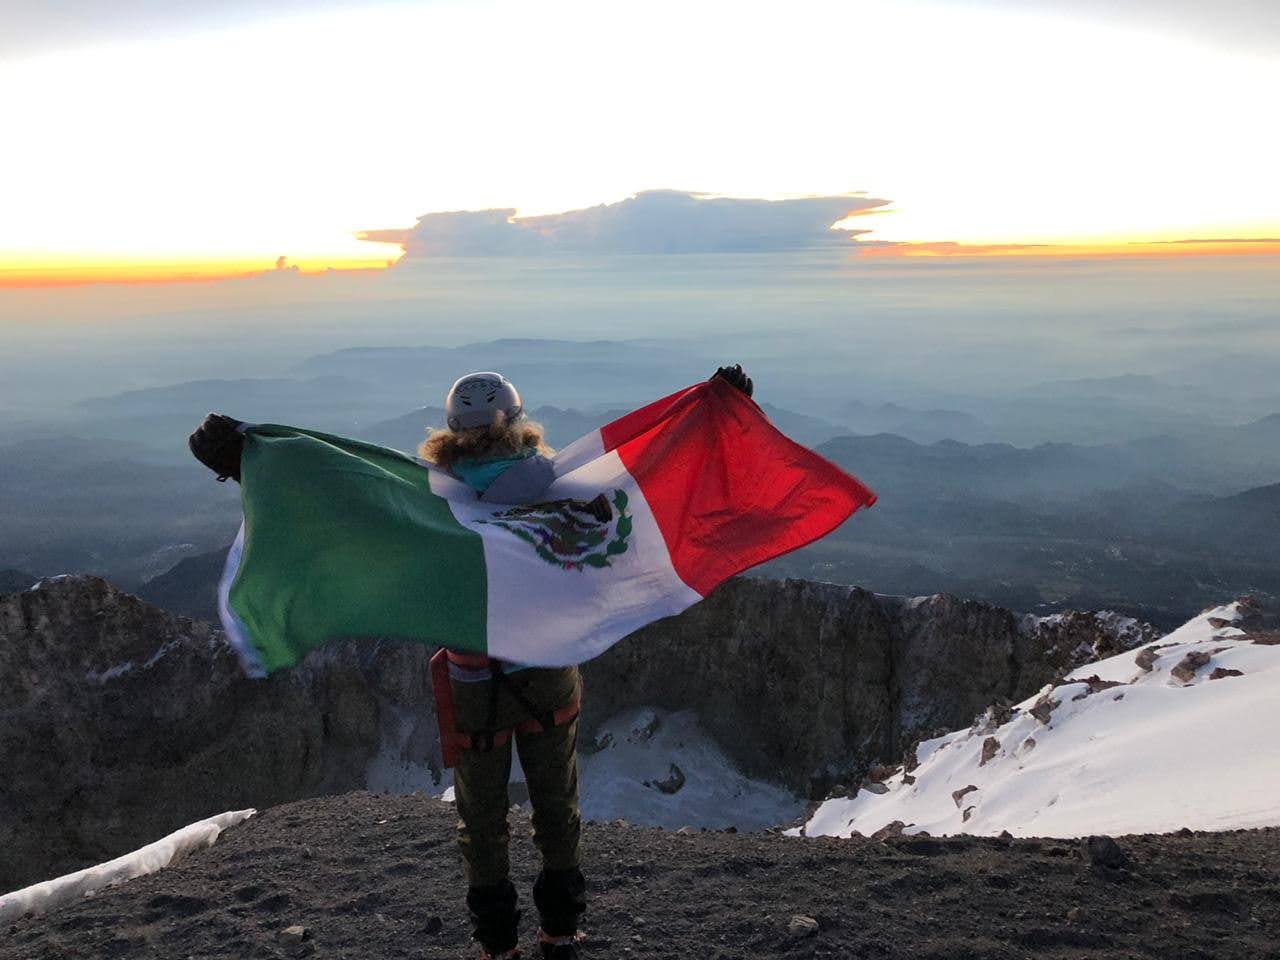 Andrea Dorantes posing on summit with Mexican flag